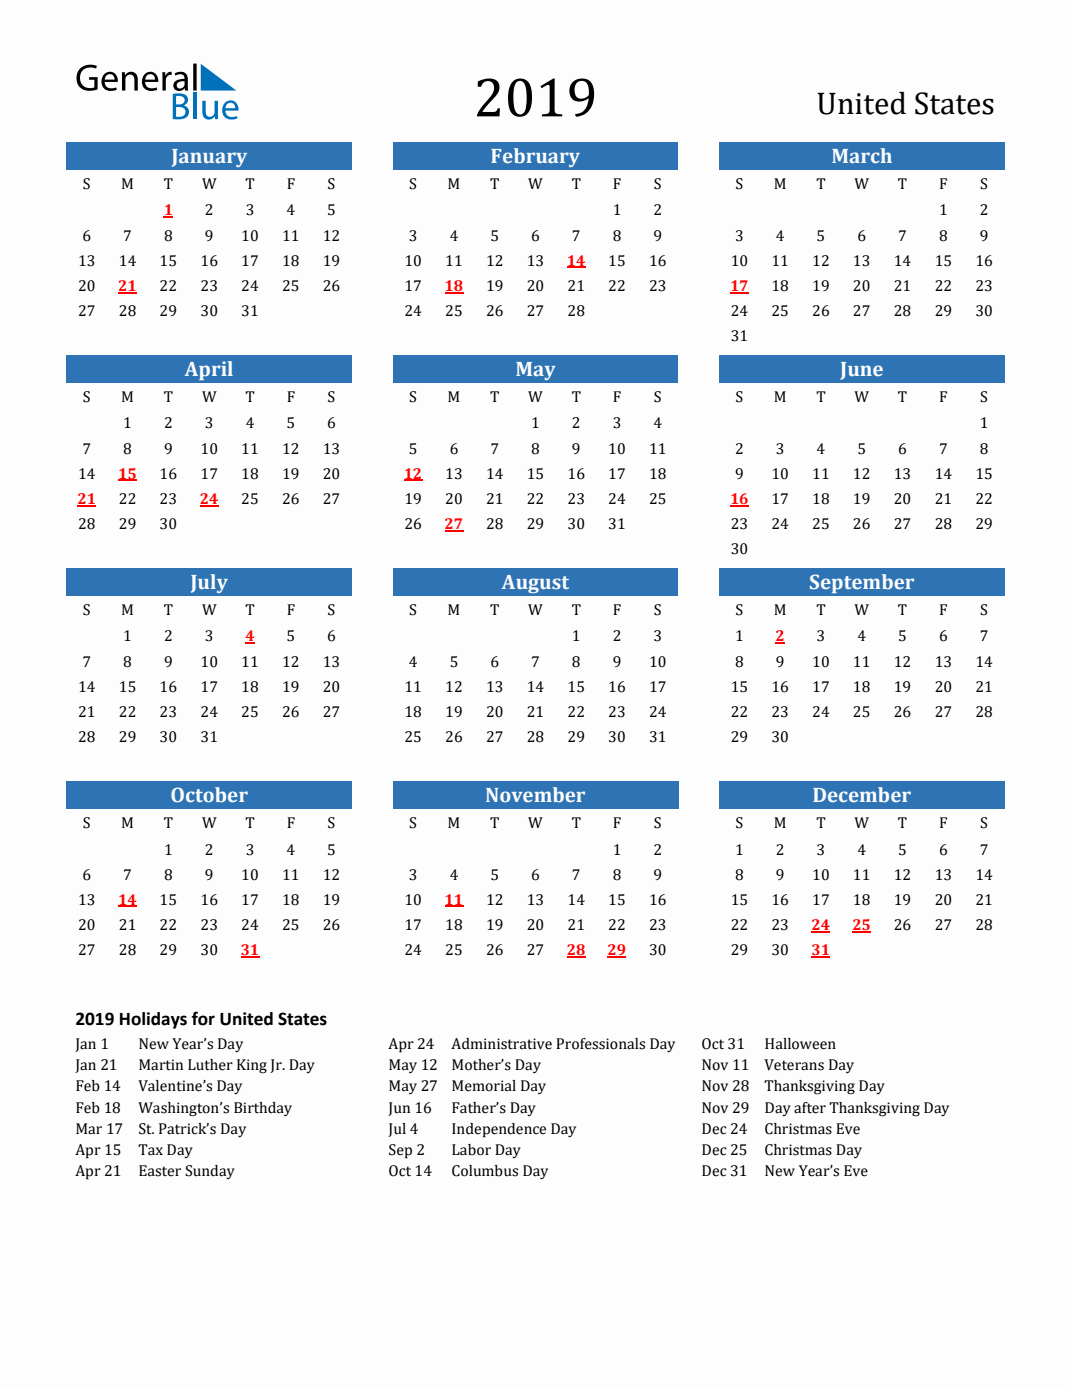 2019 United States Calendar with Holidays